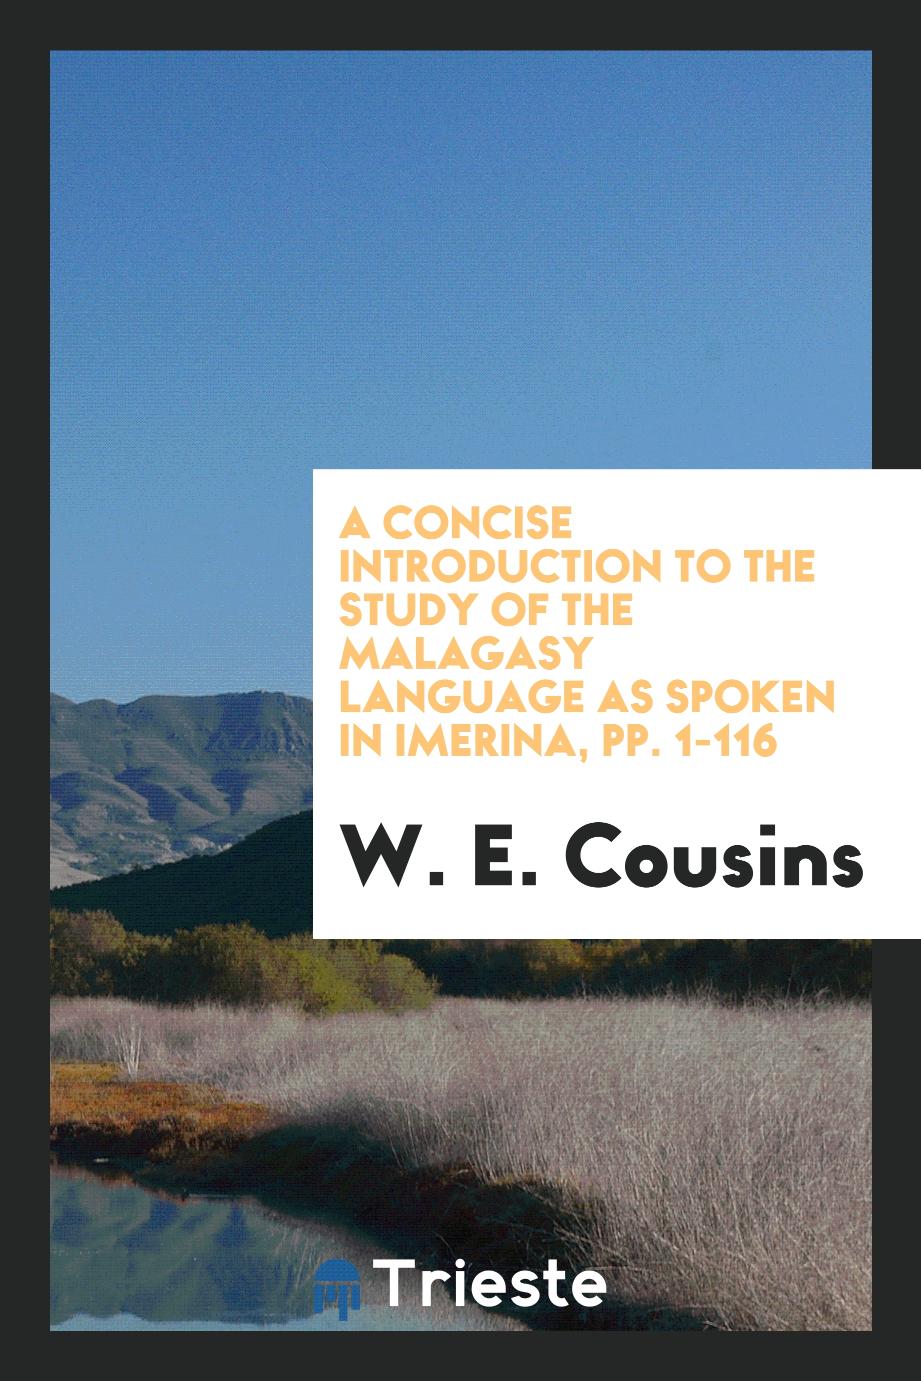 A Concise Introduction to the Study of the Malagasy Language as Spoken in Imerina, pp. 1-116